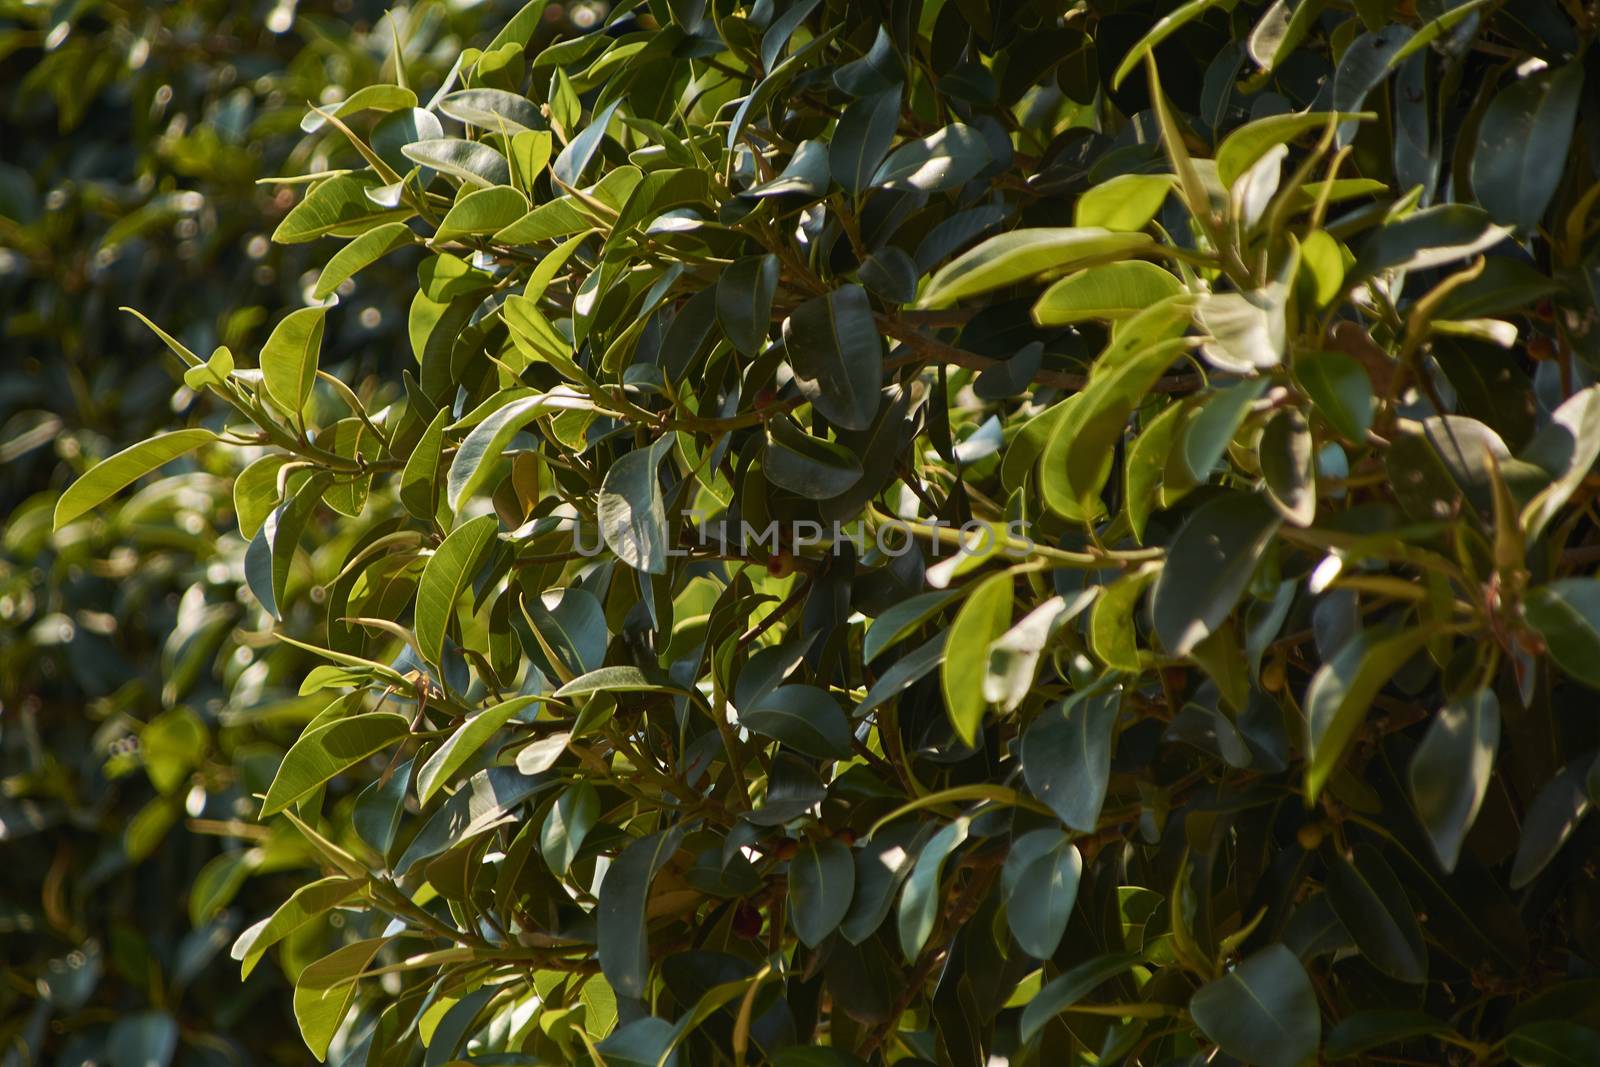 Bush of leaves in summertime period illuminated by warm sunlight